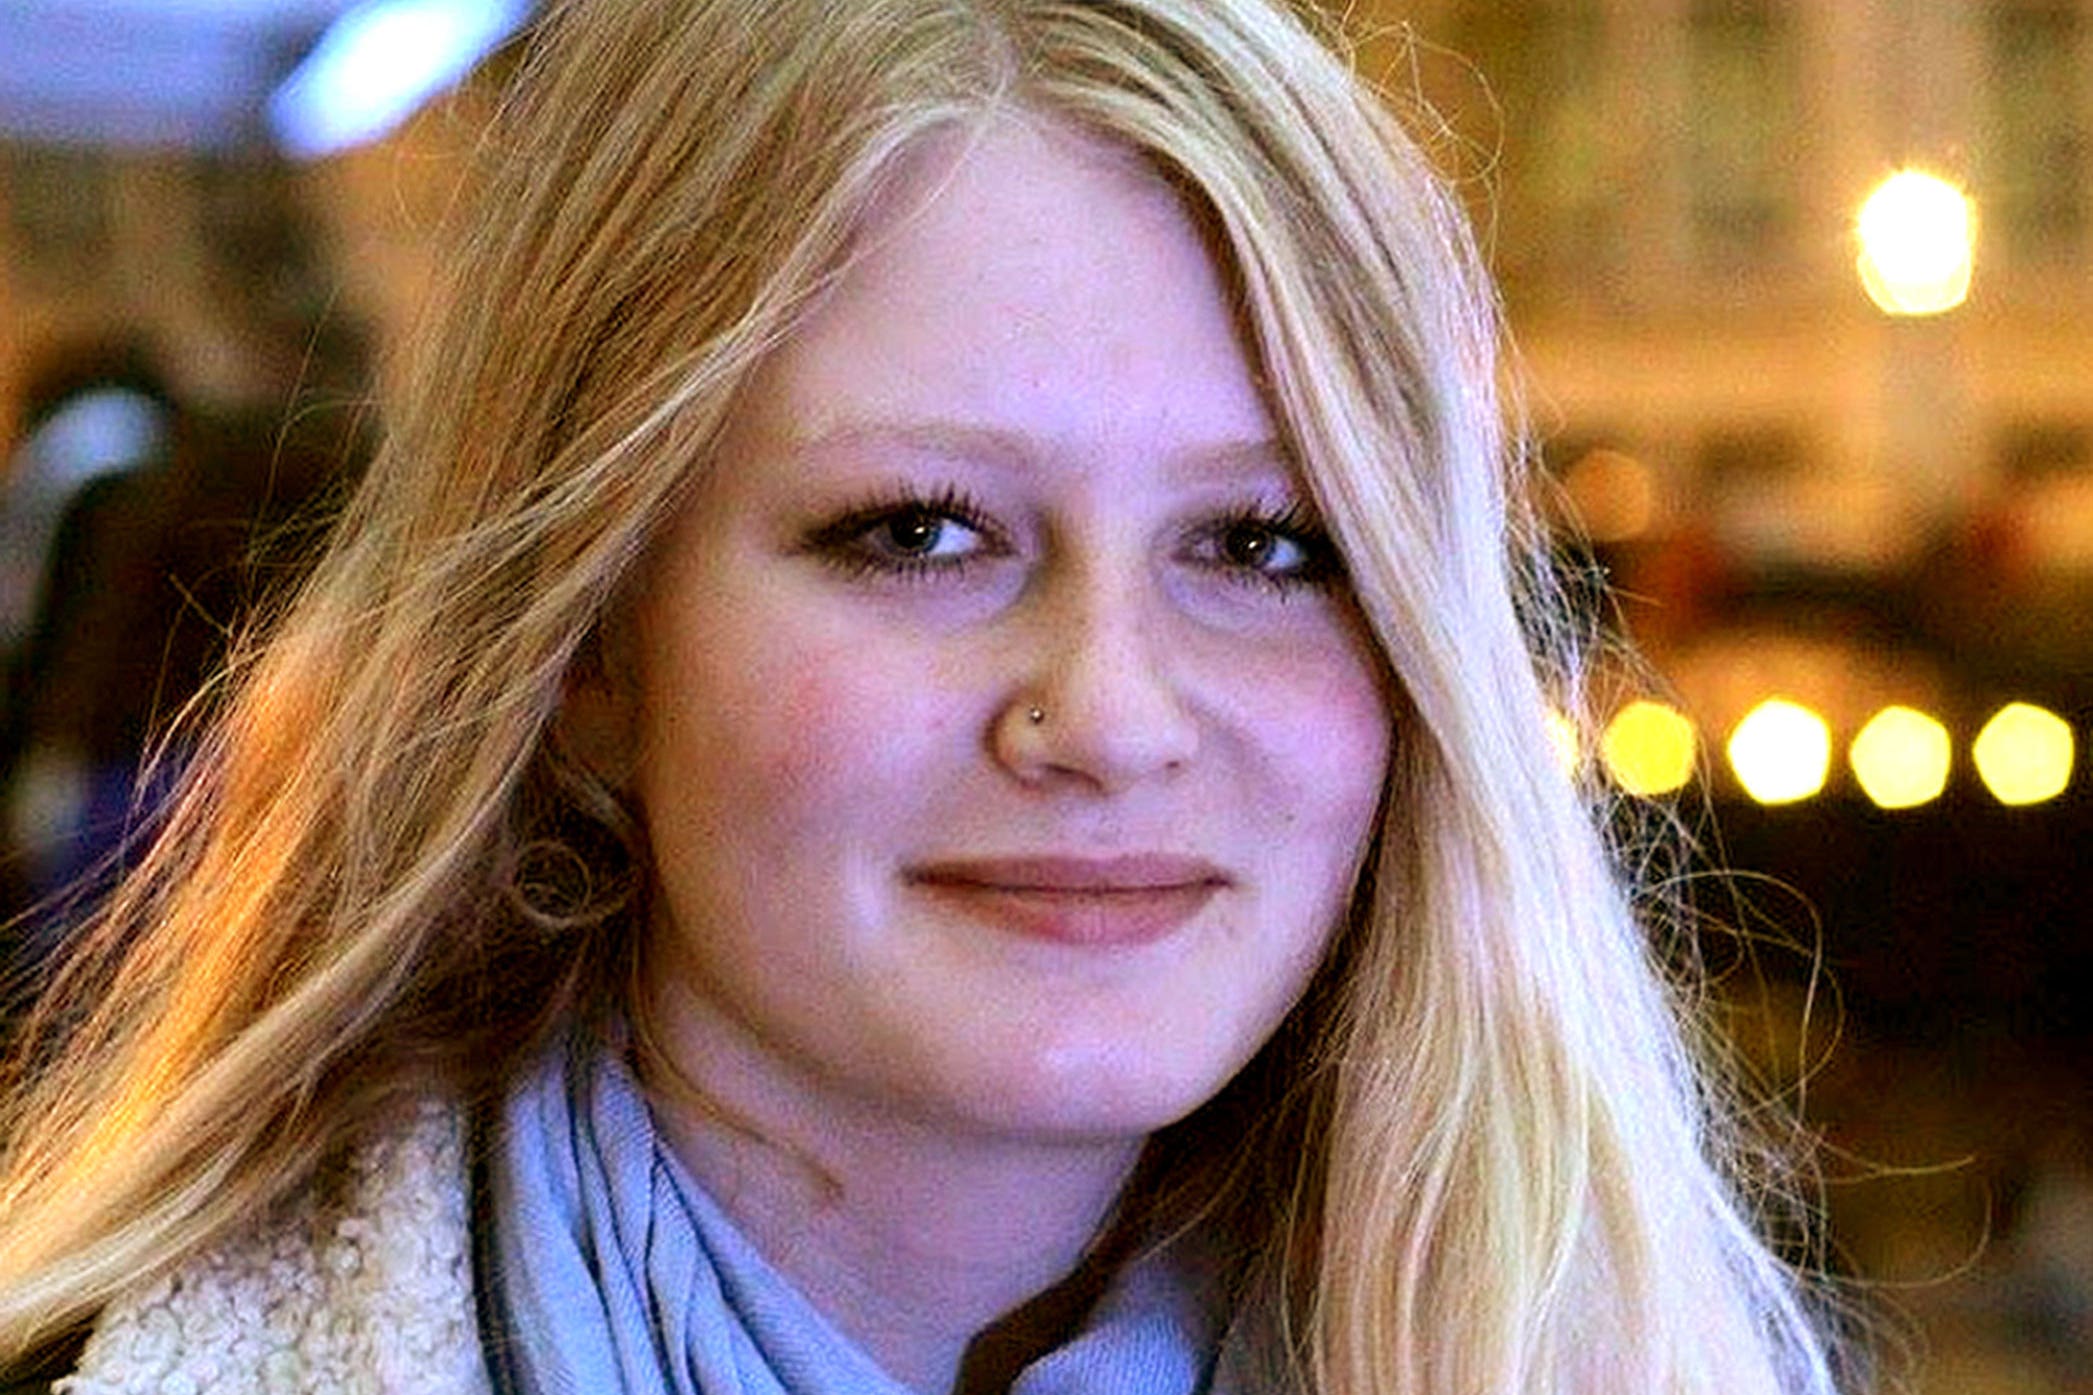 Gaia Pope, who suffered rape as a child, was allegedly sexually harrassed while on a mixed ward